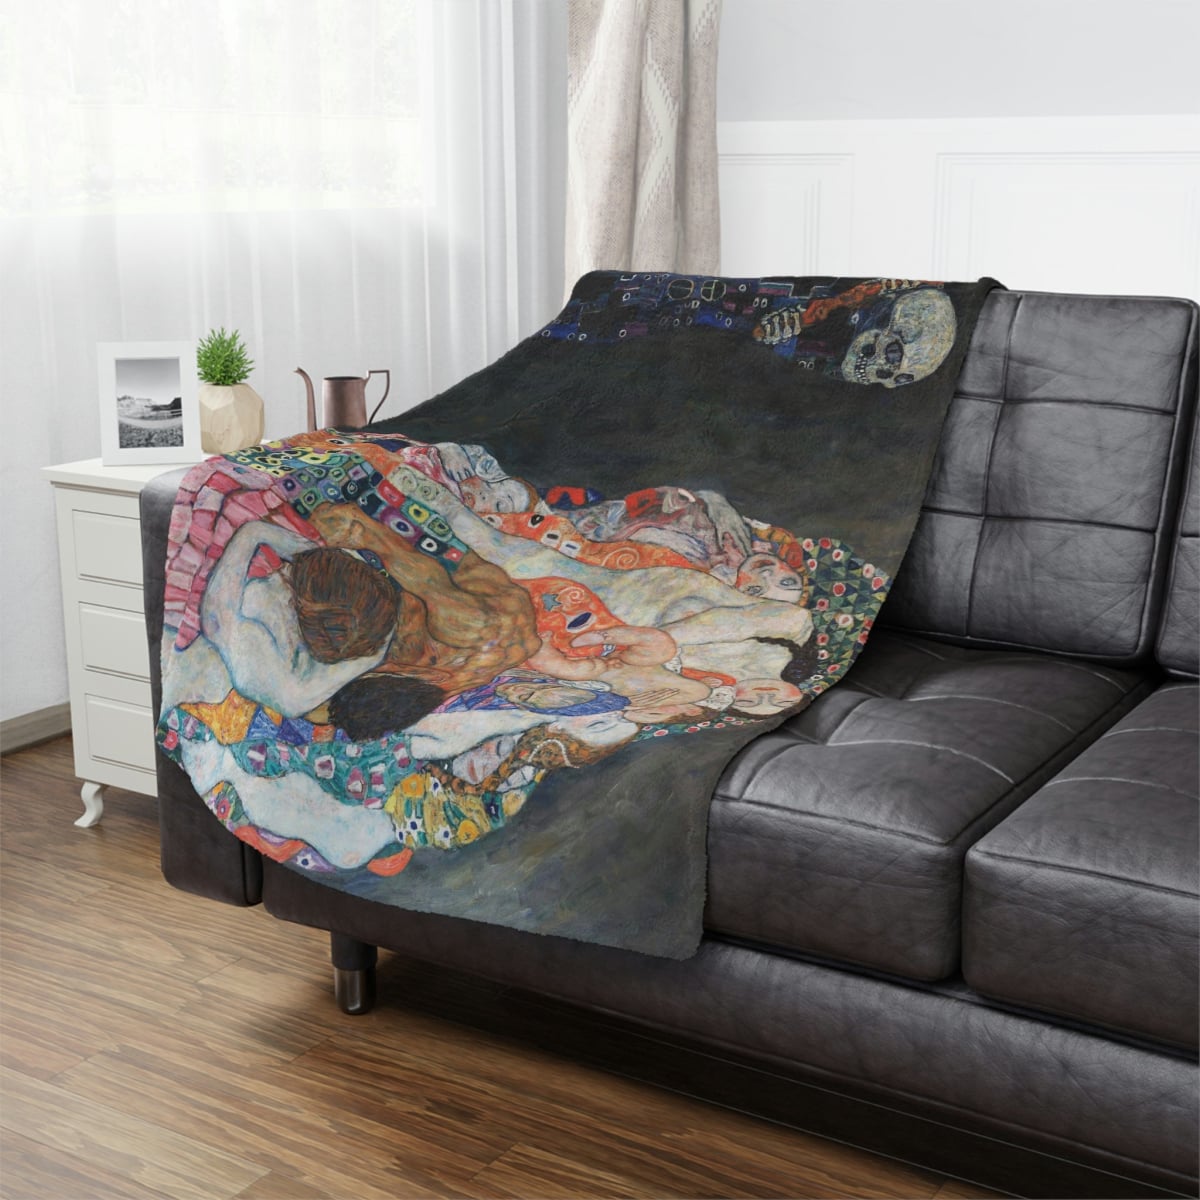 Artistic home decor: Klimt's 'Death and Life' art-inspired throw